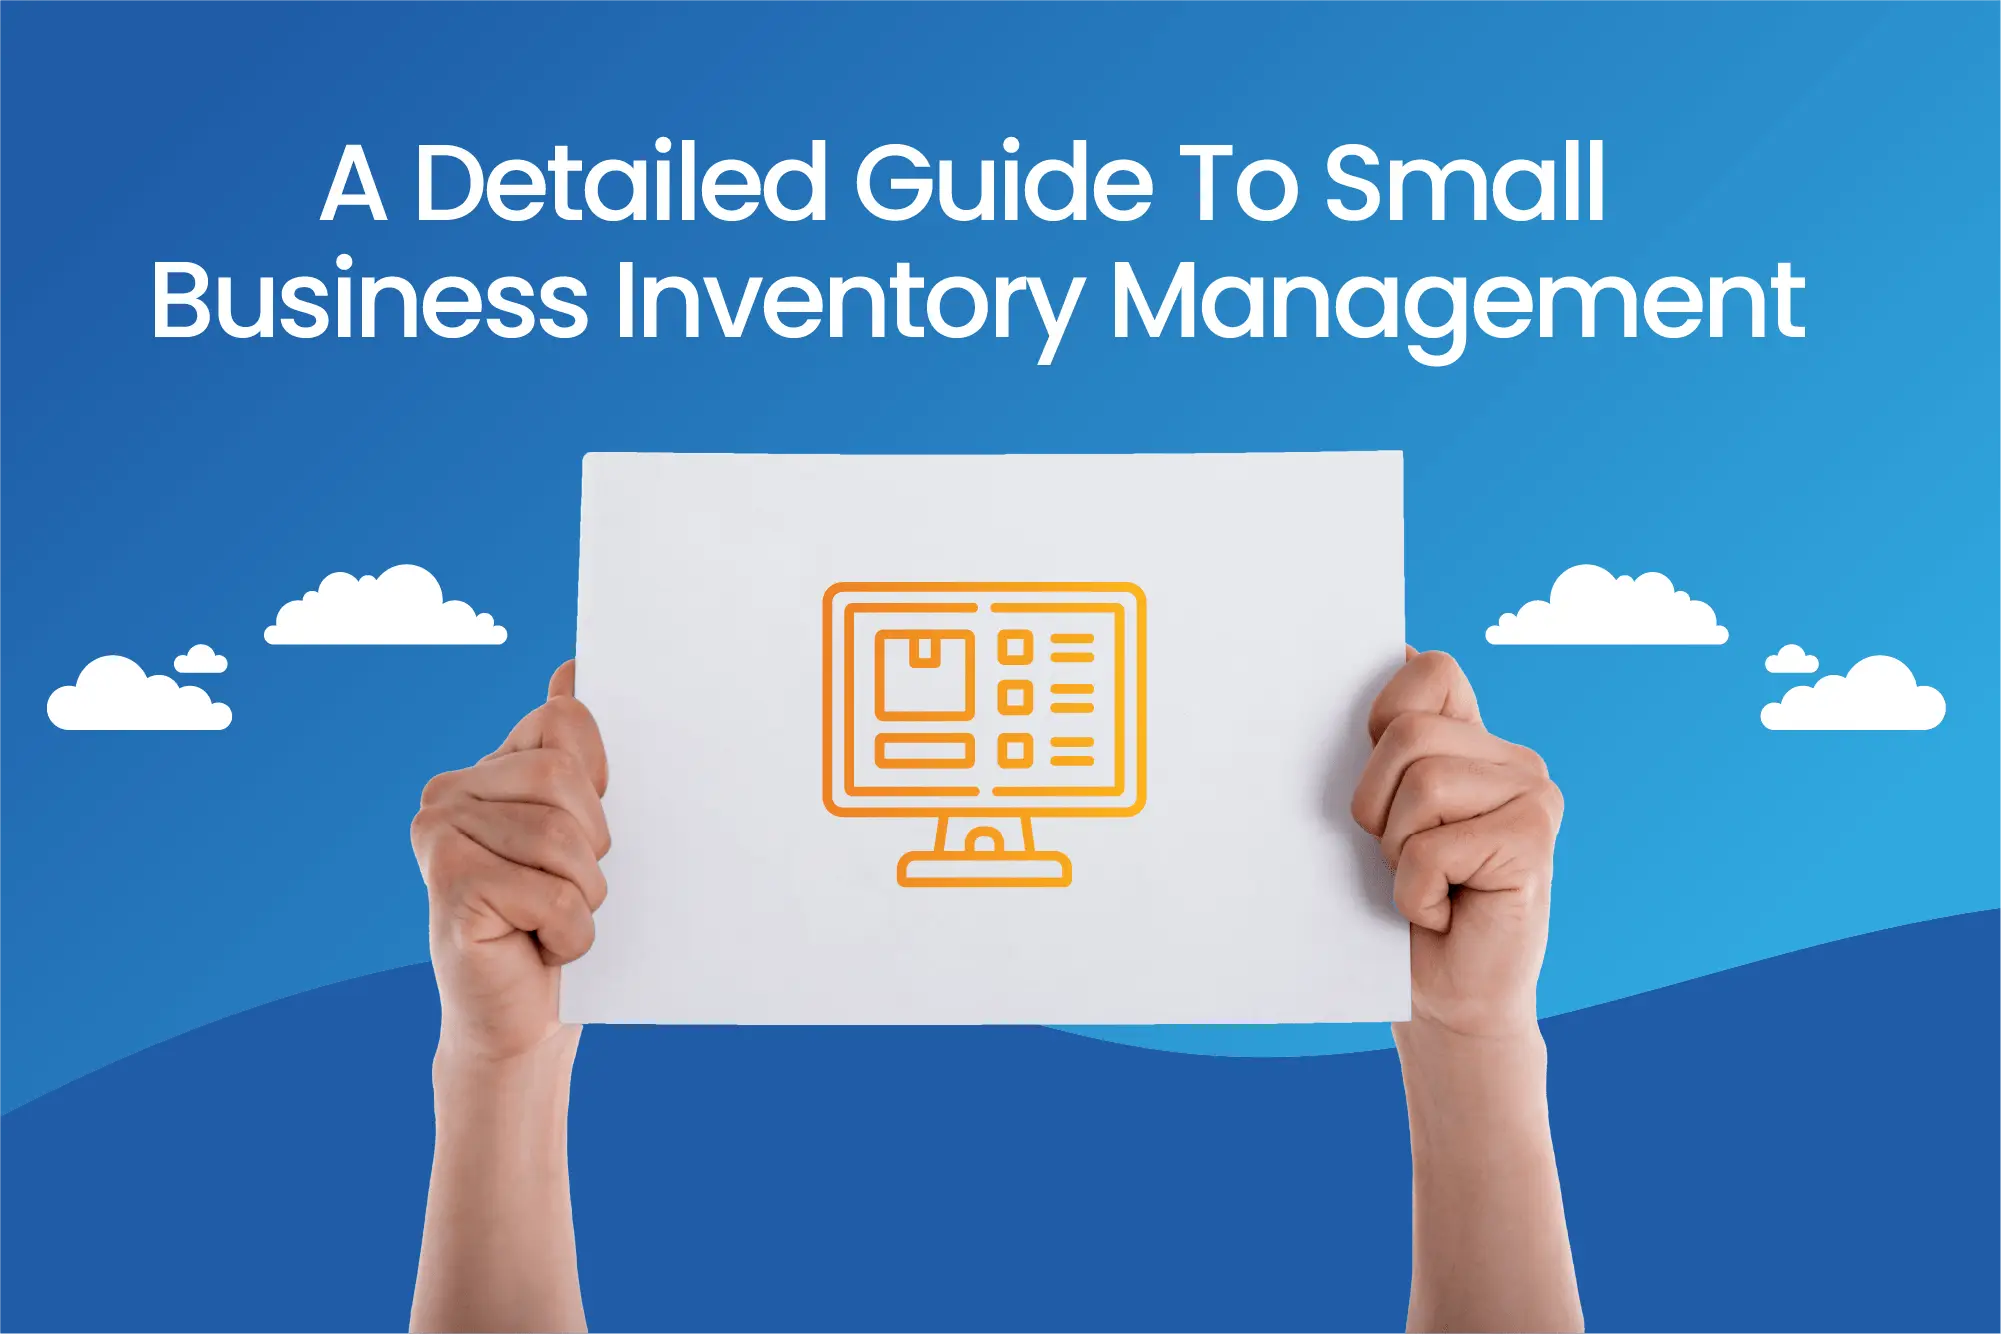 Inventory Management 01: Efficiently Manage Small Business Inventory